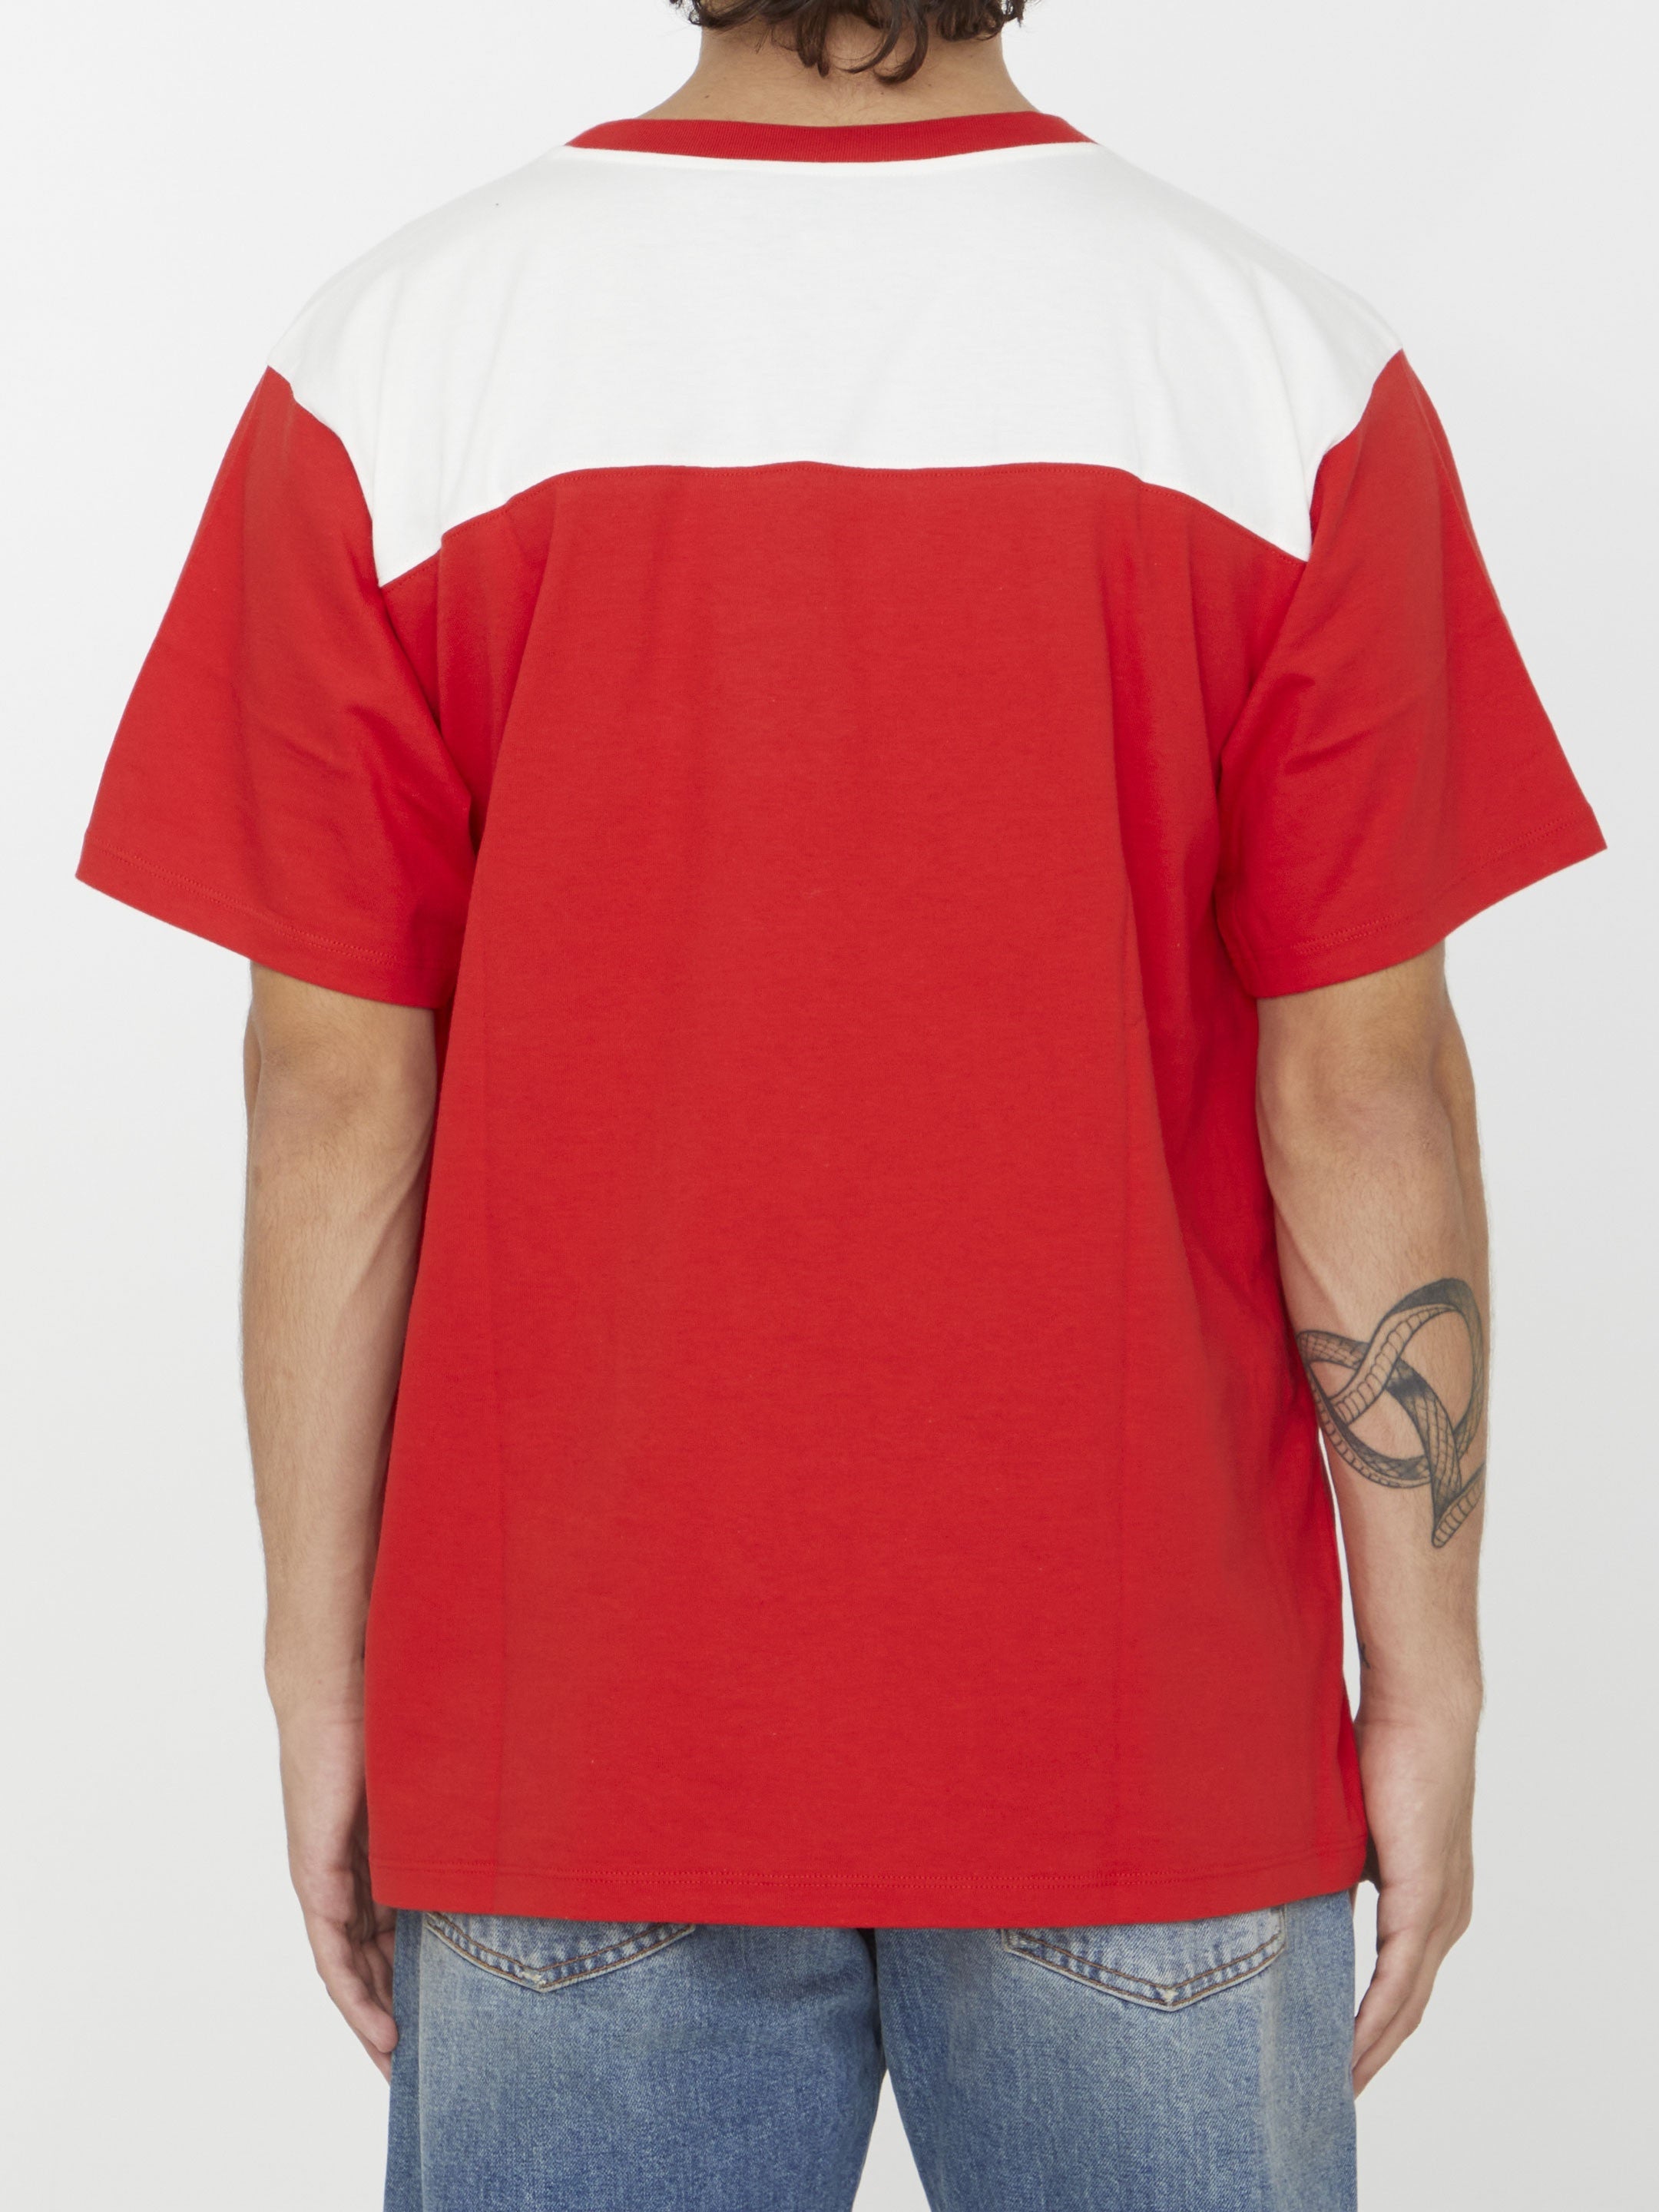 GUCCI-OUTLET-SALE-Cotton-jersey-t-shirt-Shirts-M-RED-ARCHIVE-COLLECTION-4.jpg